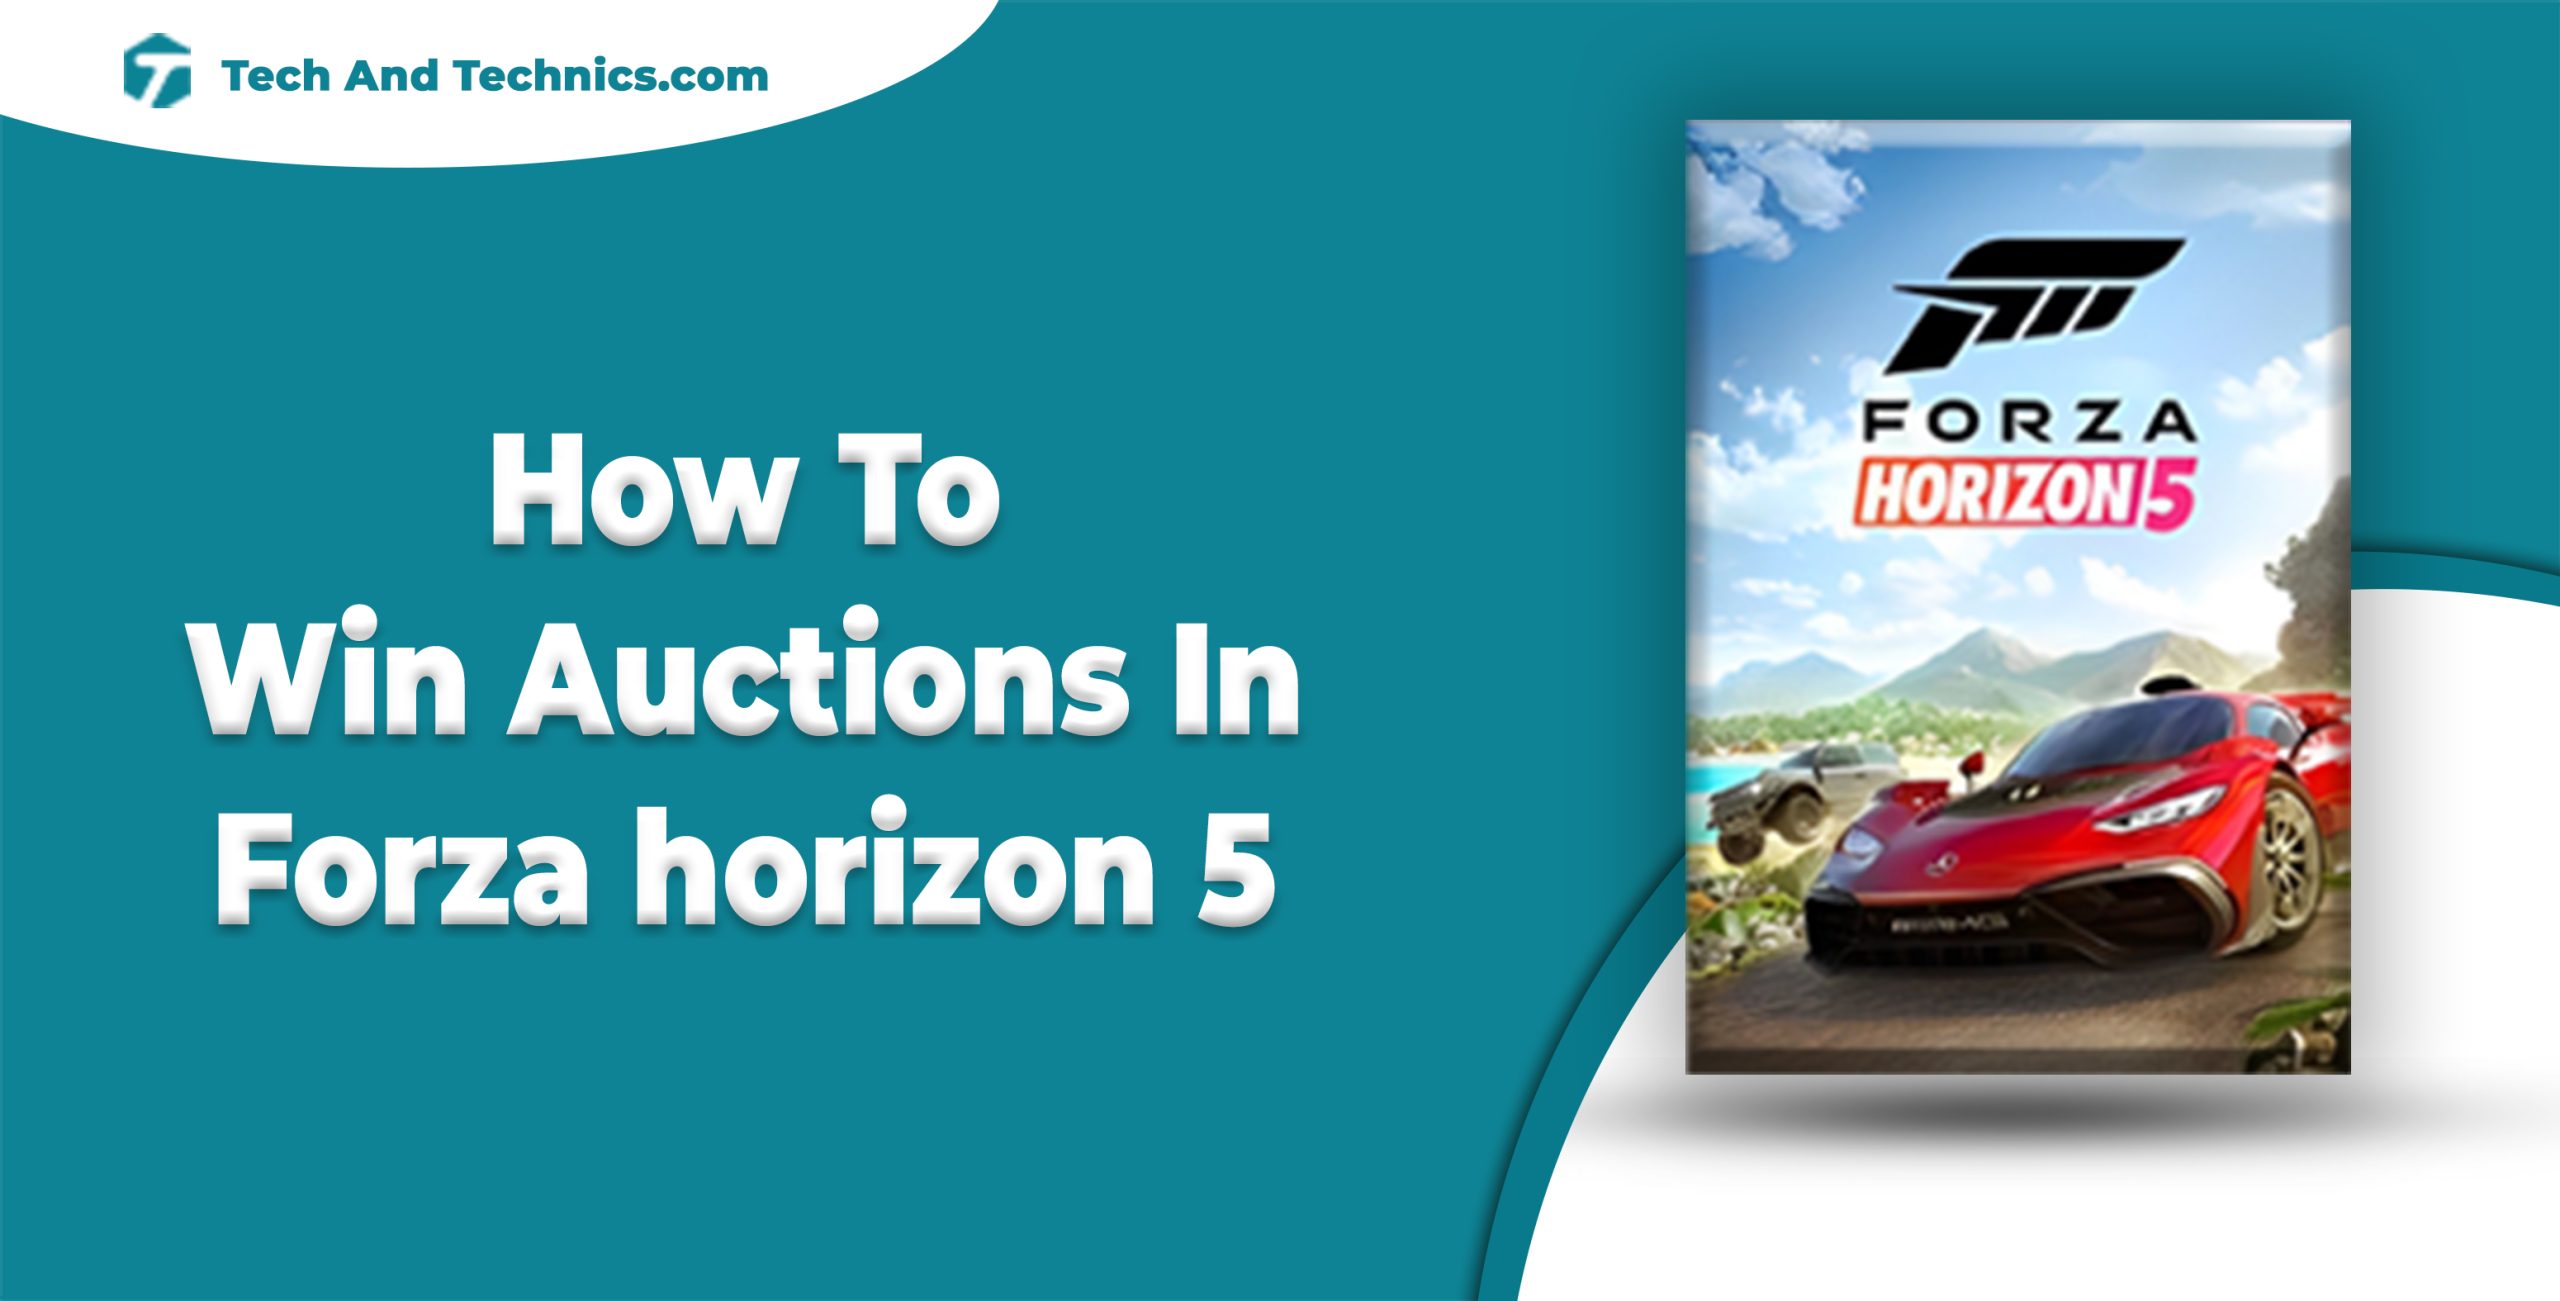 How To Win Auctions In Forza Horizon 5 (Guide)